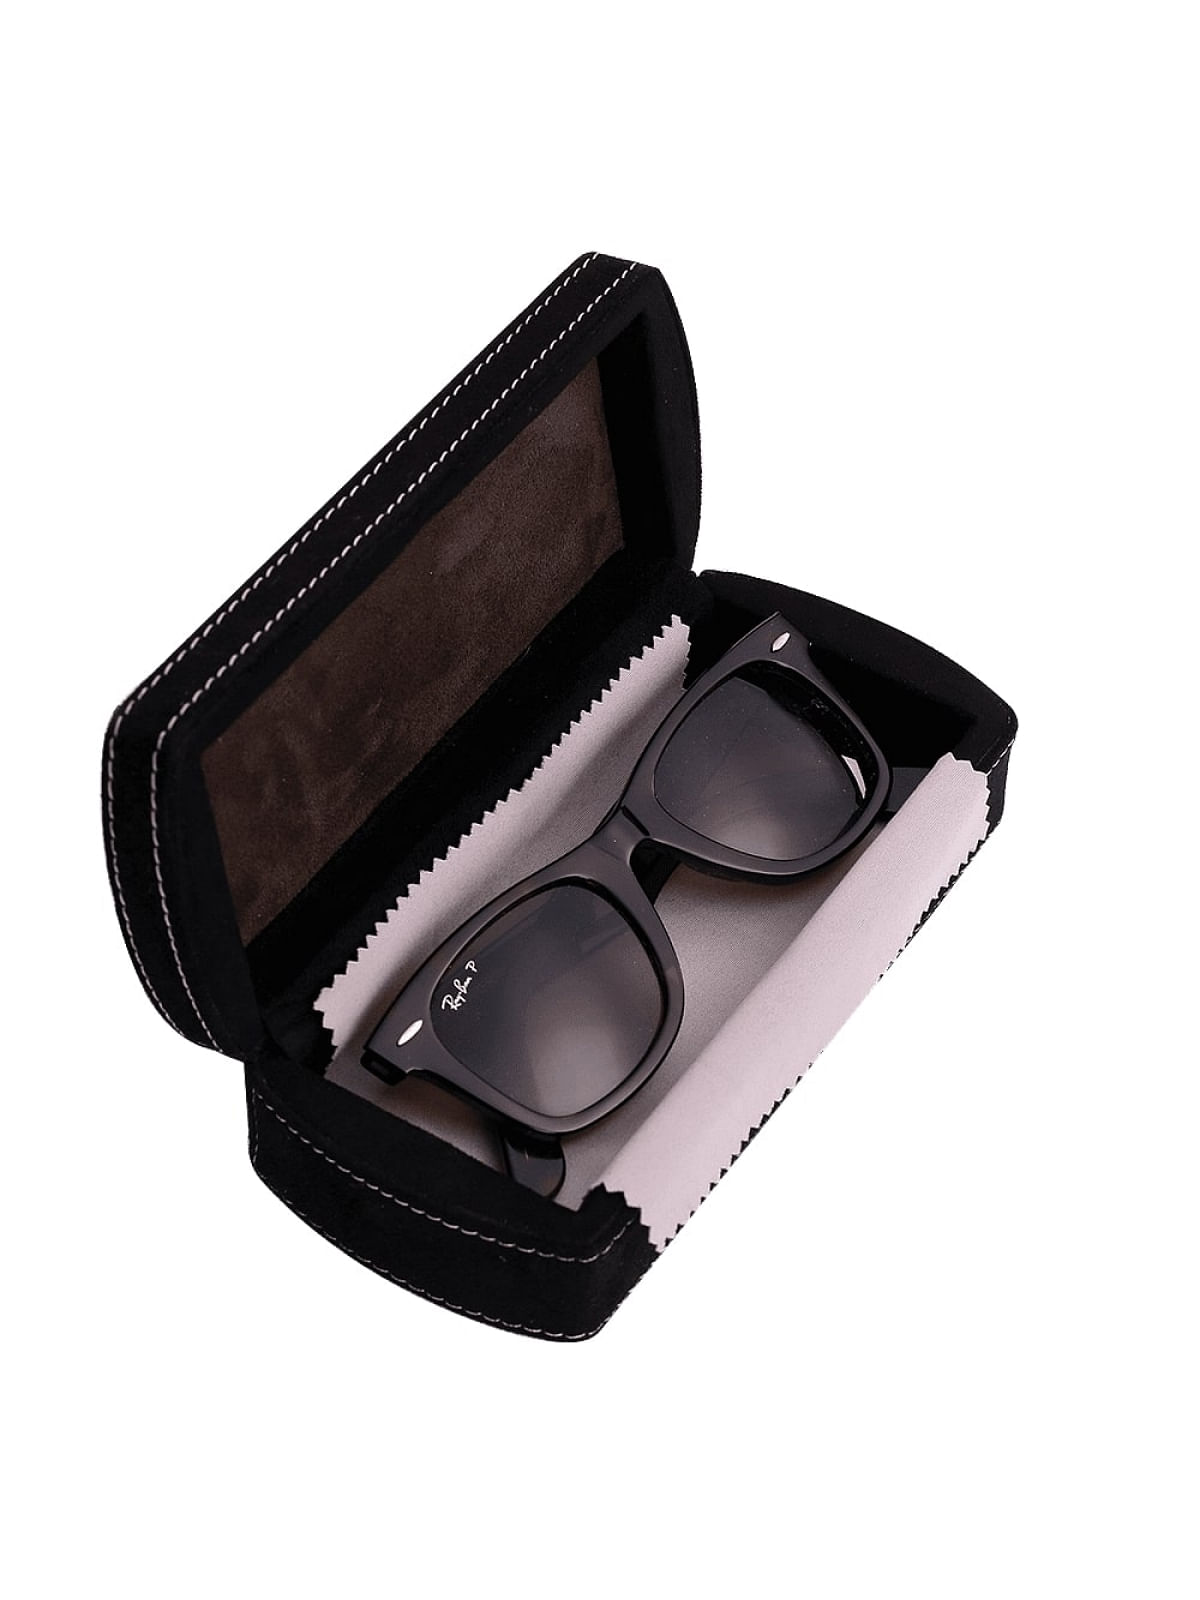 The Spectacle/Sunglass Case